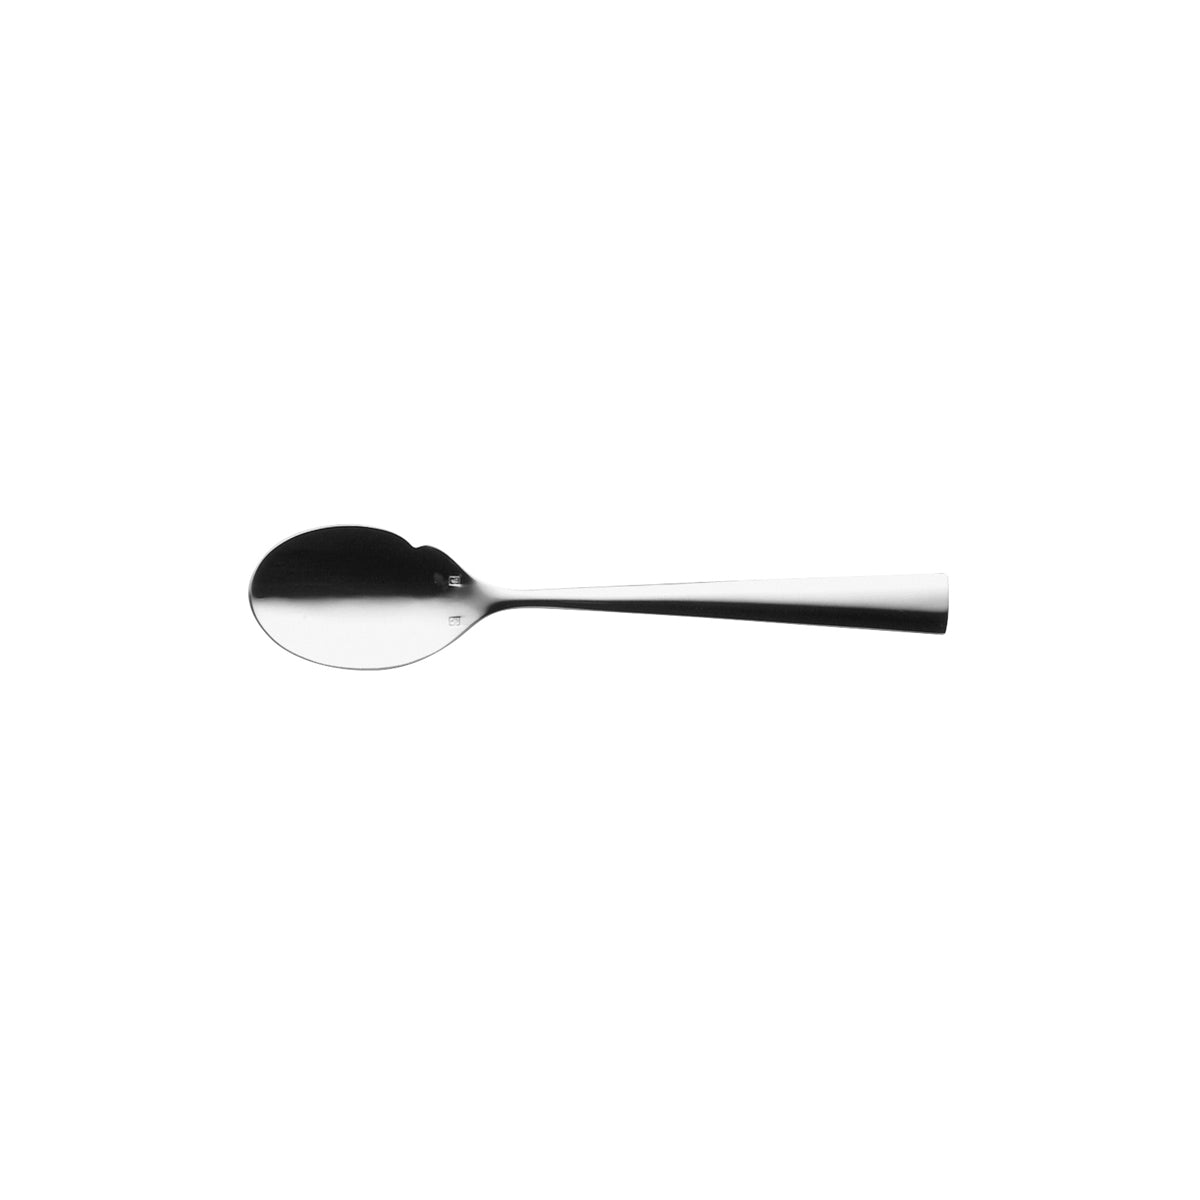 01.0053.1580 Hepp Accent French Sauce Spoon Tomkin Australia Hospitality Supplies